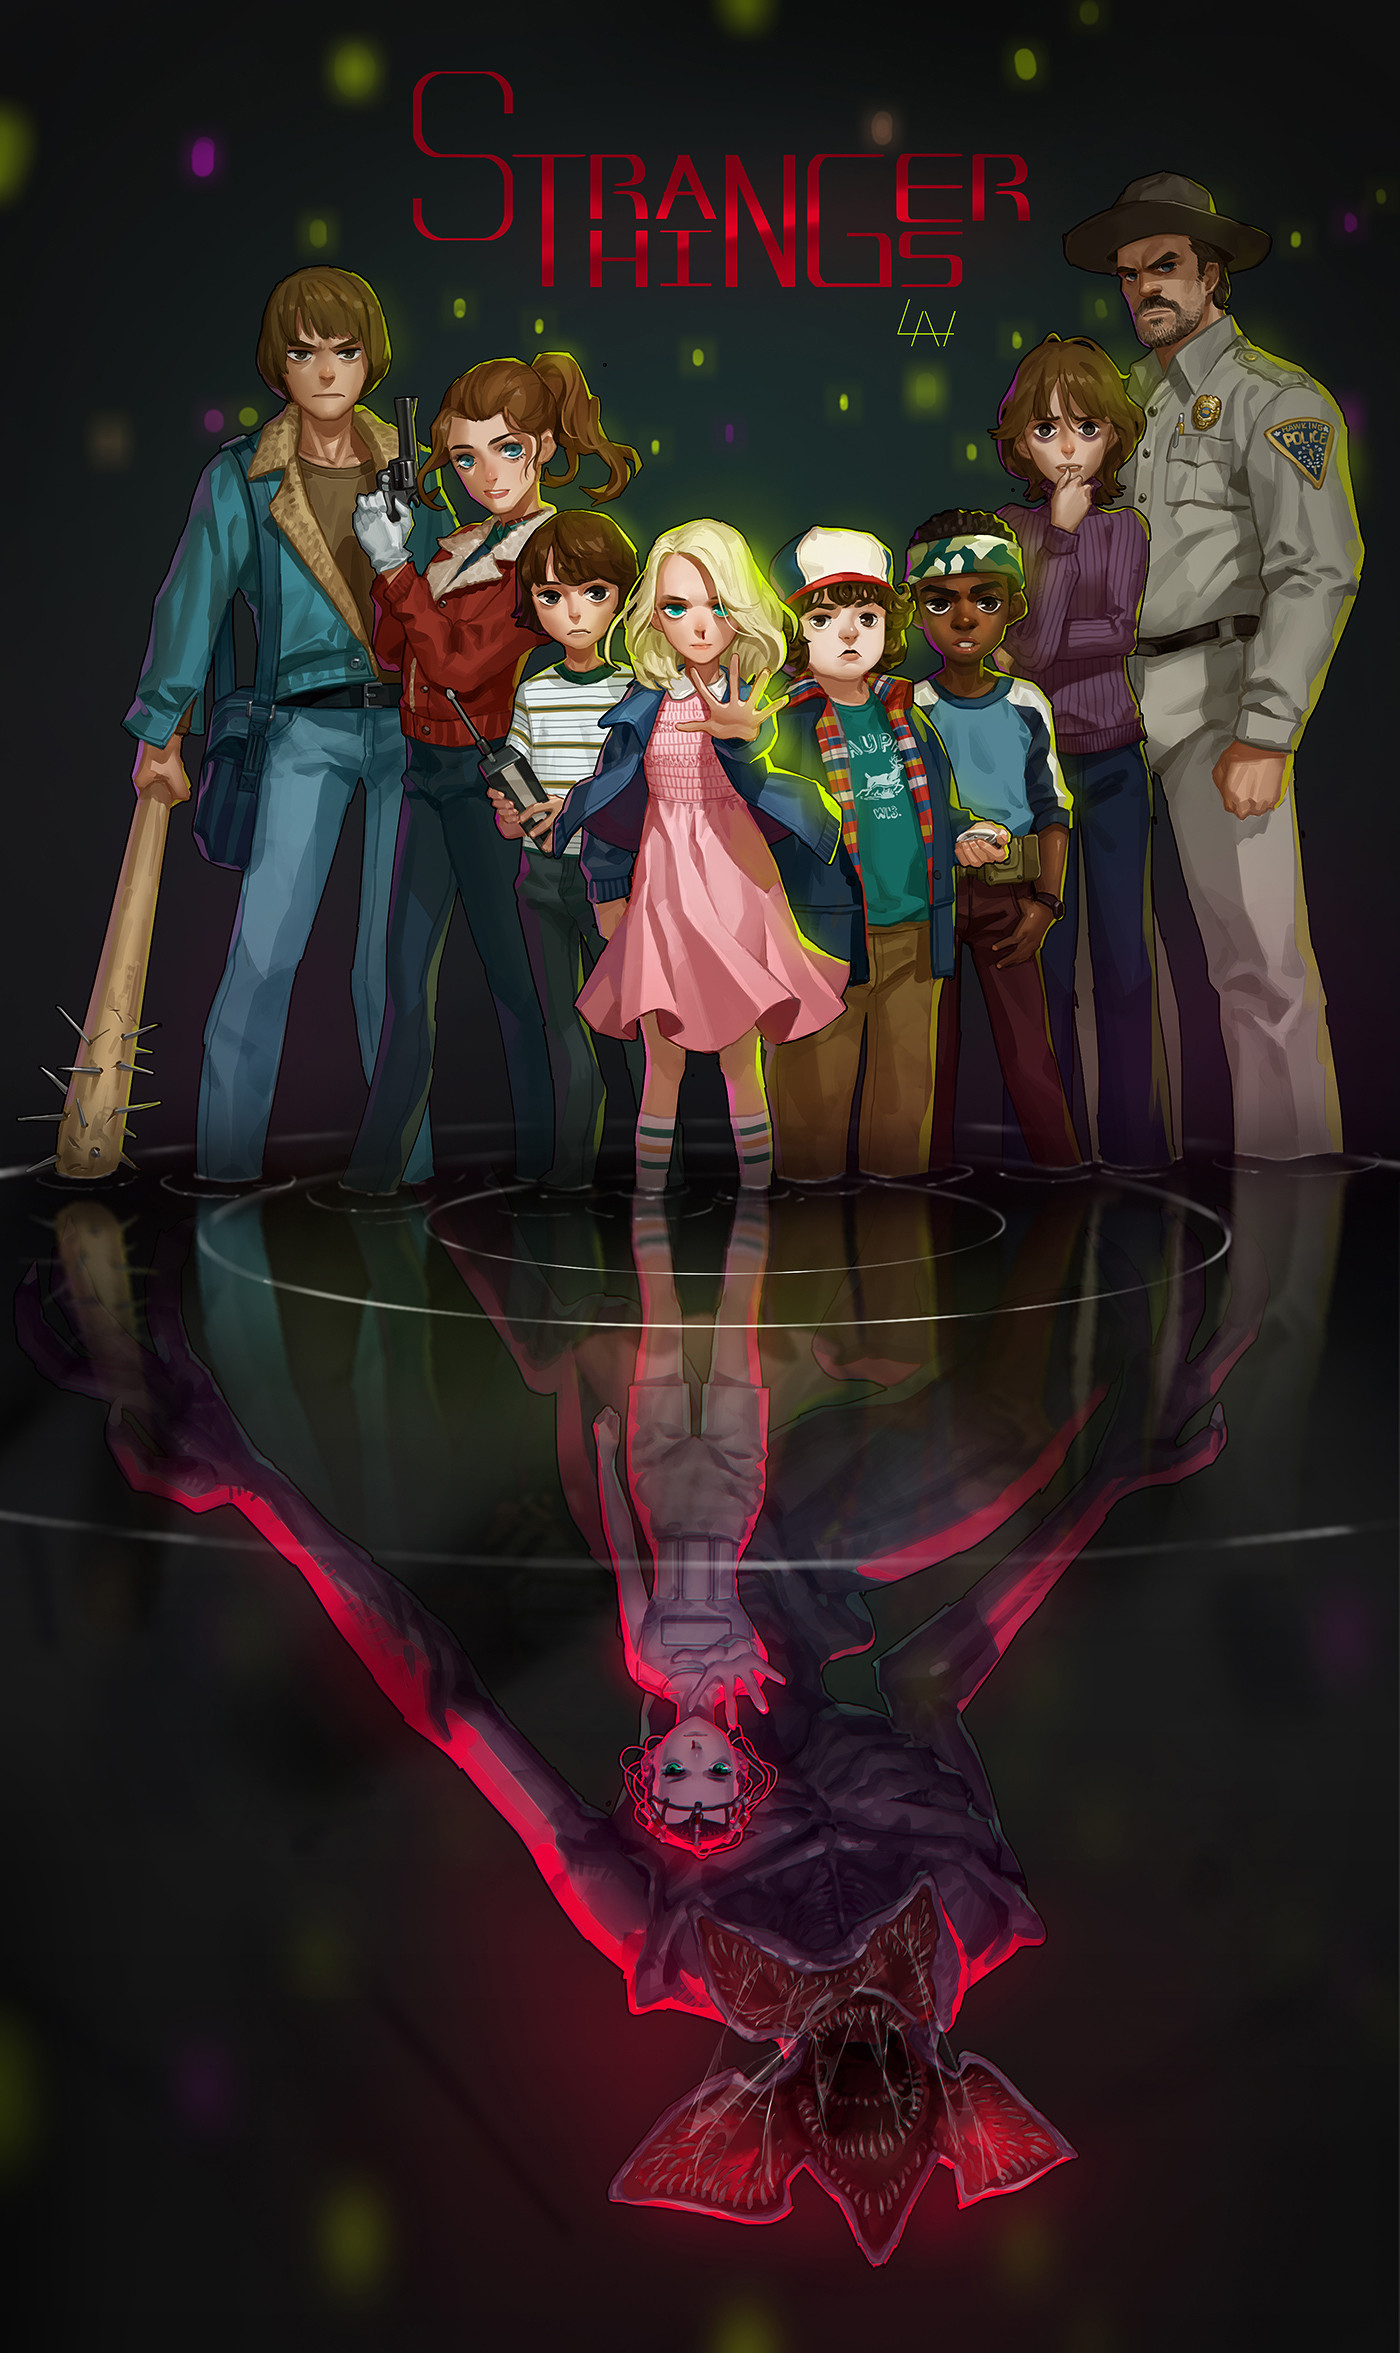 Fine Art: A Stranger Things Anime Is Not The Worst Idea